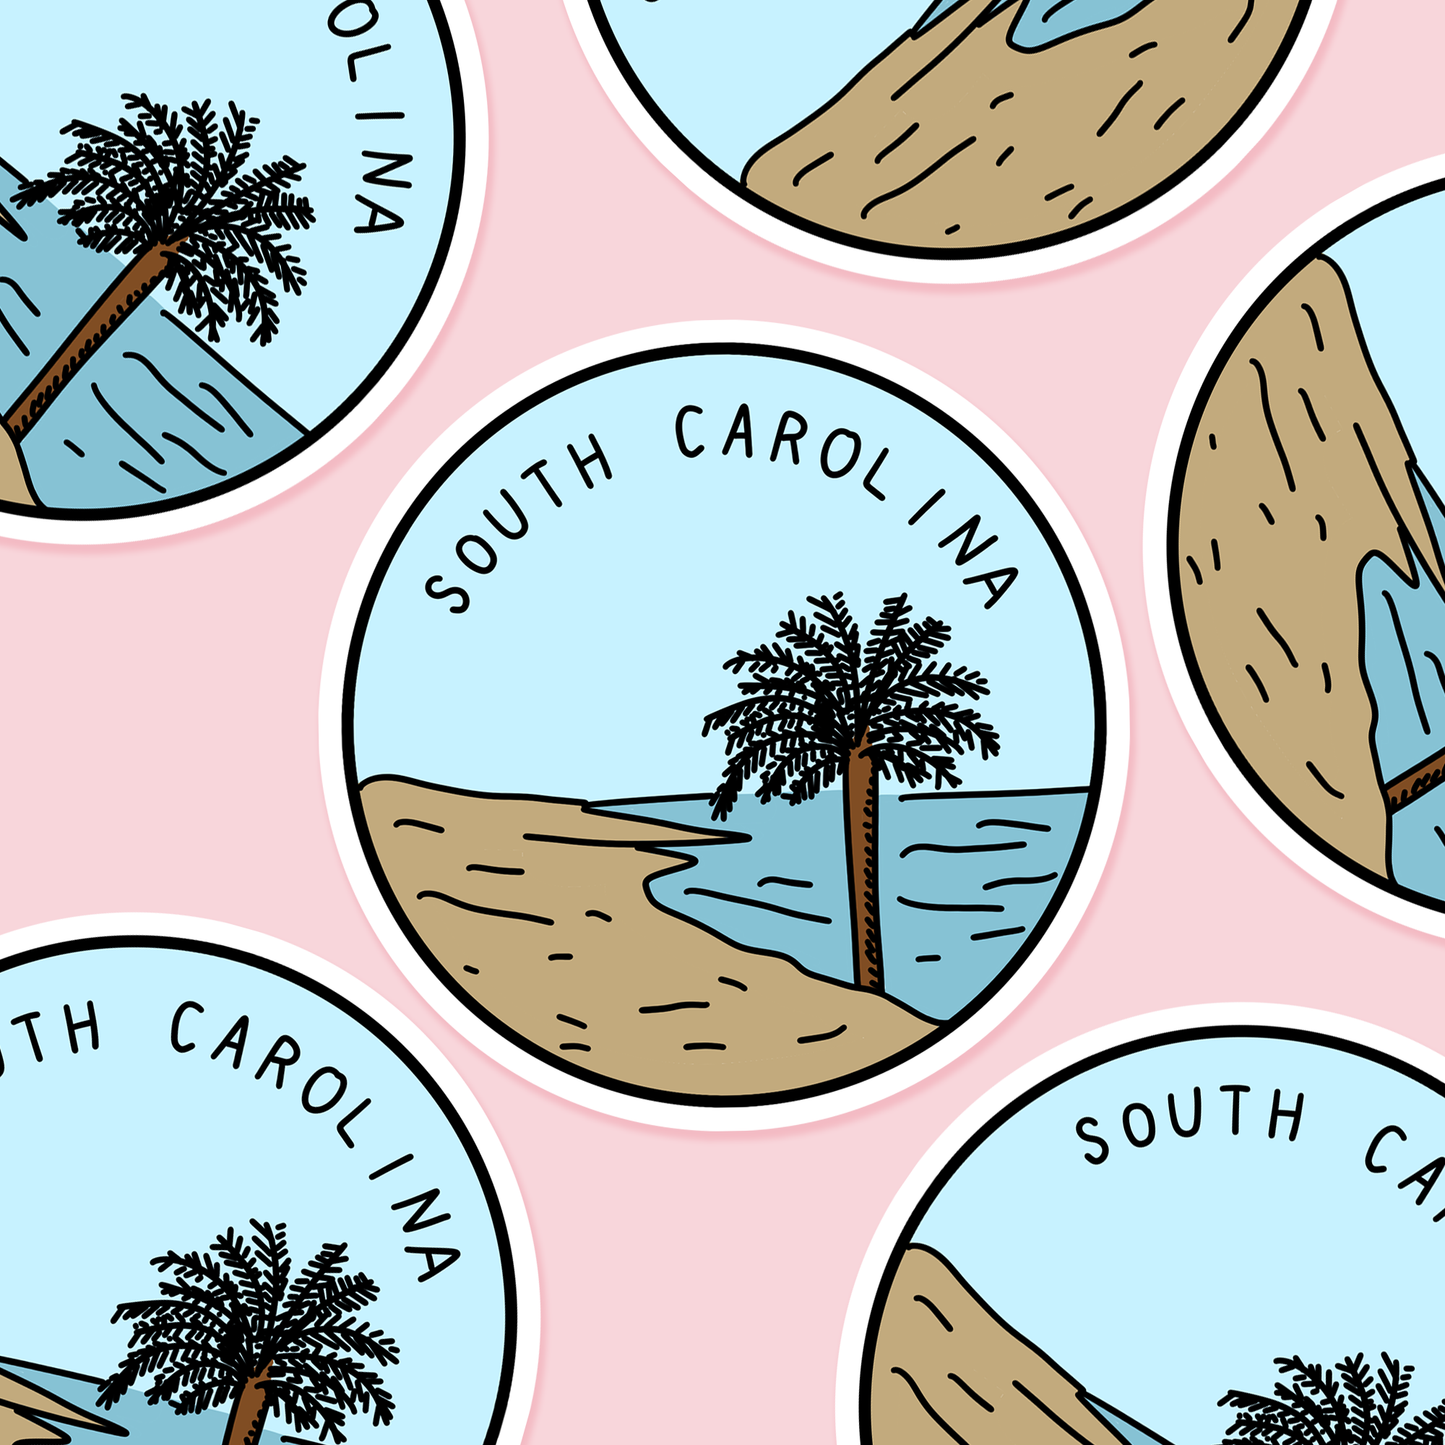 South Carolina Illustrated US State 3 x 3 in - Travel Sticker